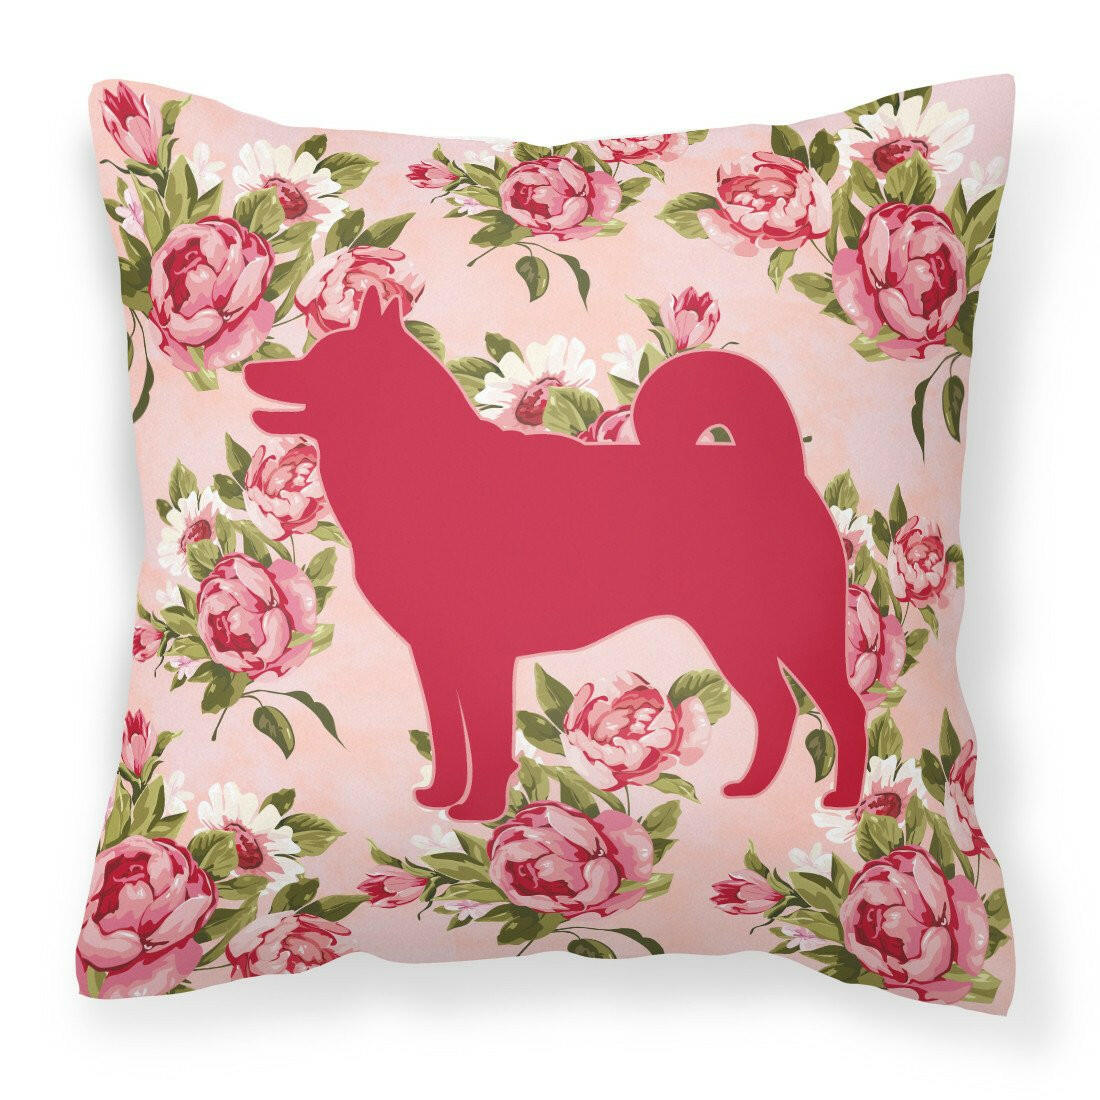 Shiba Inu Shabby Chic Pink Roses  Fabric Decorative Pillow BB1067-RS-PK-PW1414 - the-store.com